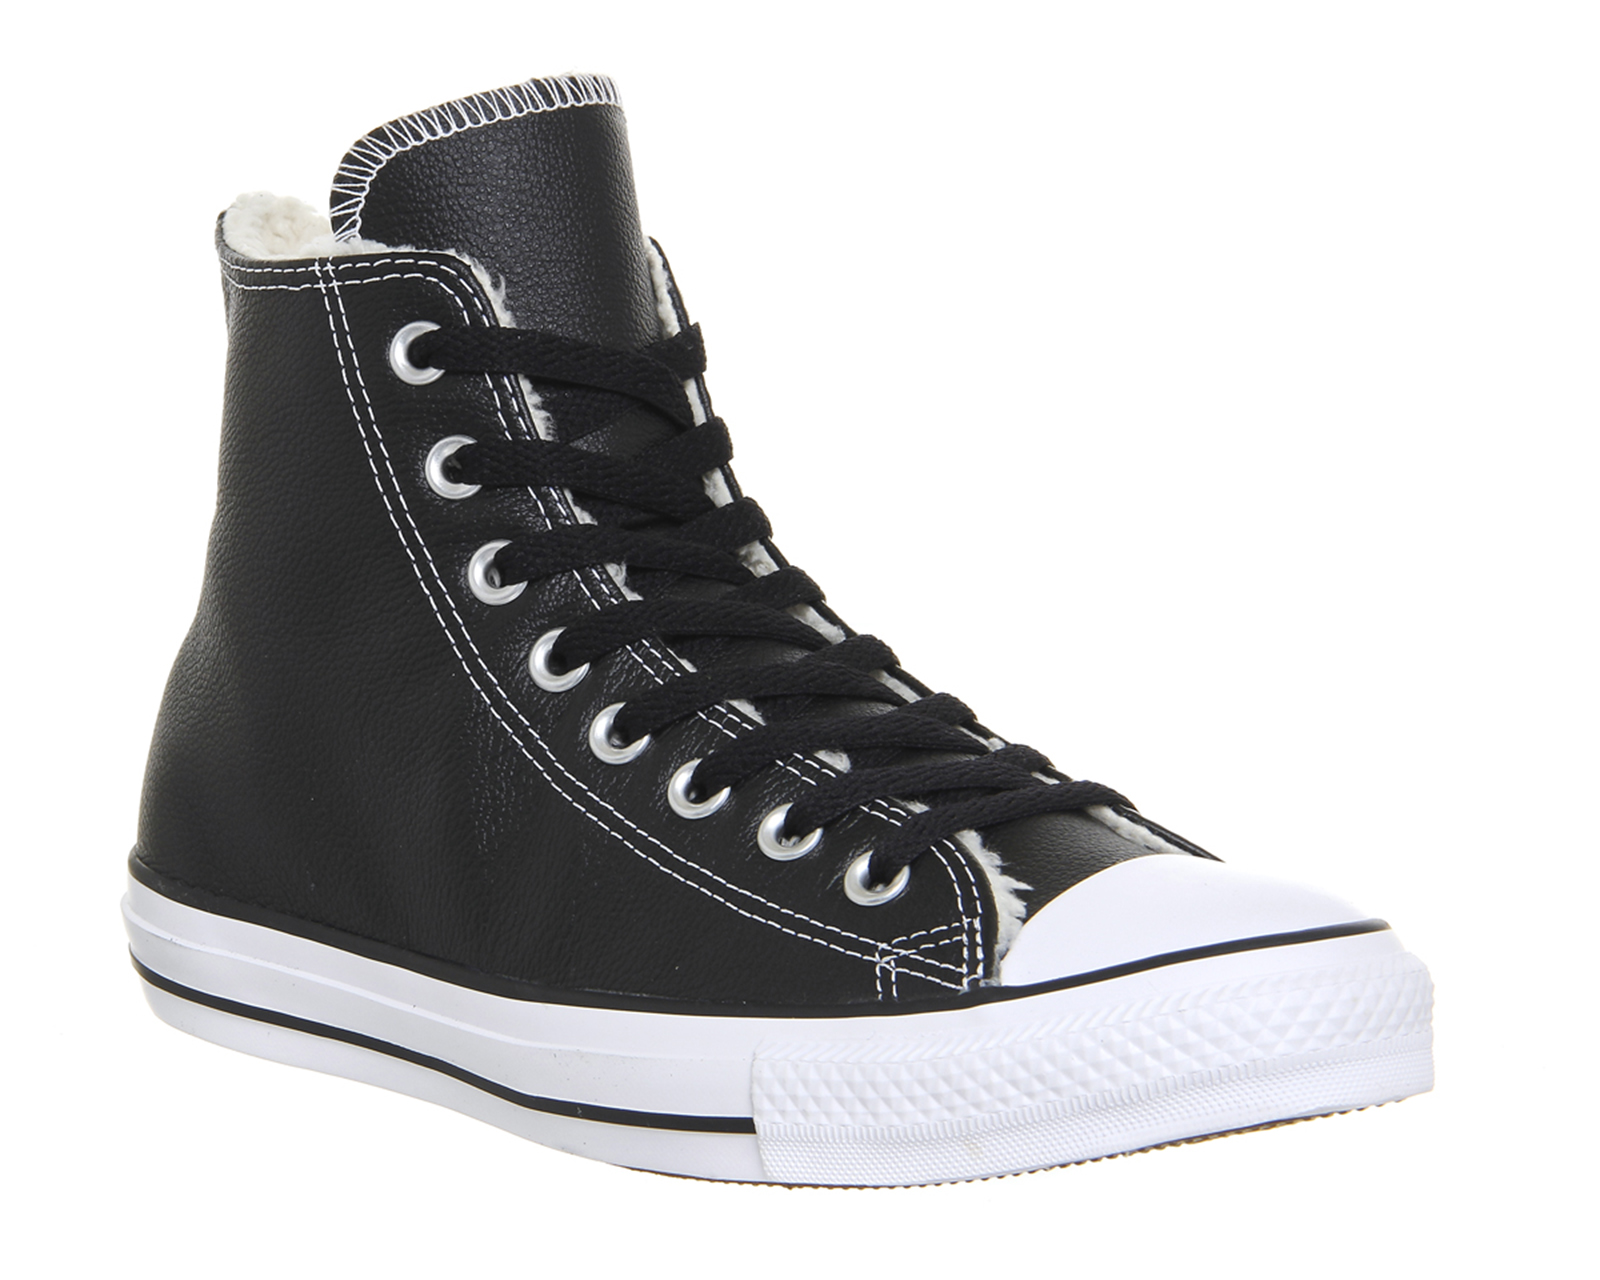 converse all star black and white leather